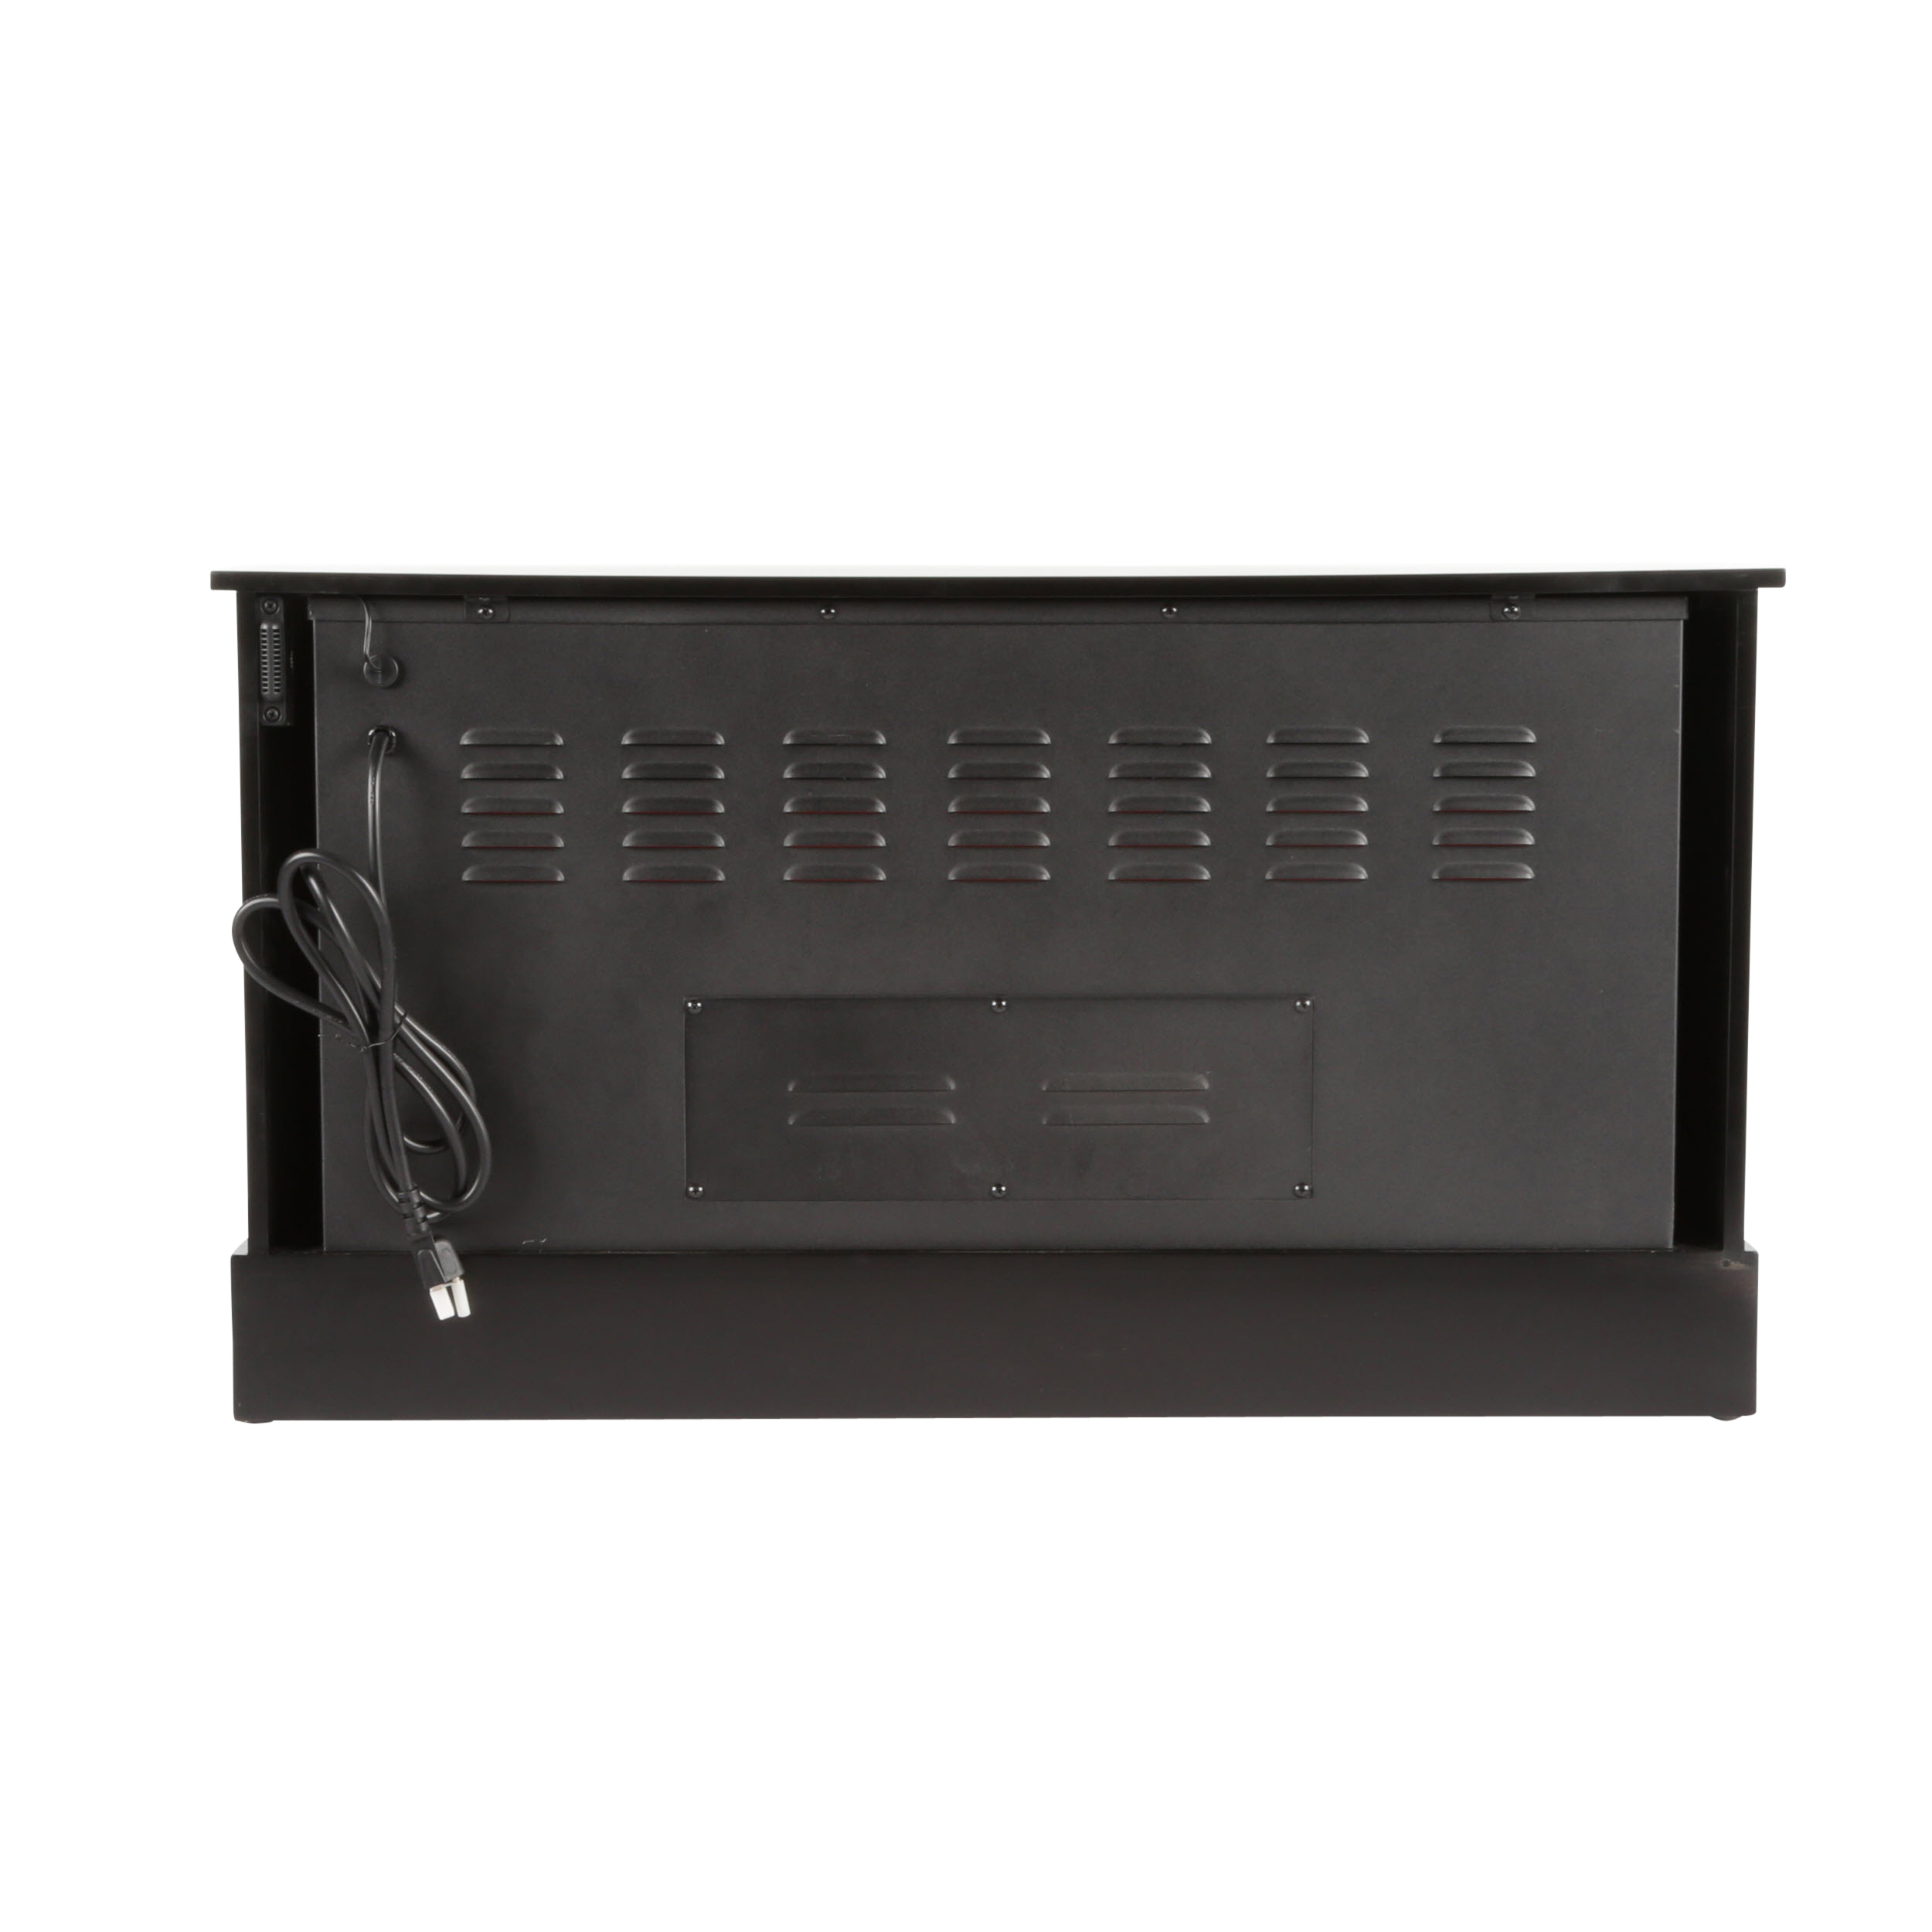 Lifesource 20" Tall Heater Fireplace with Color-Change LED Affect, Black Cabinet - image 4 of 5